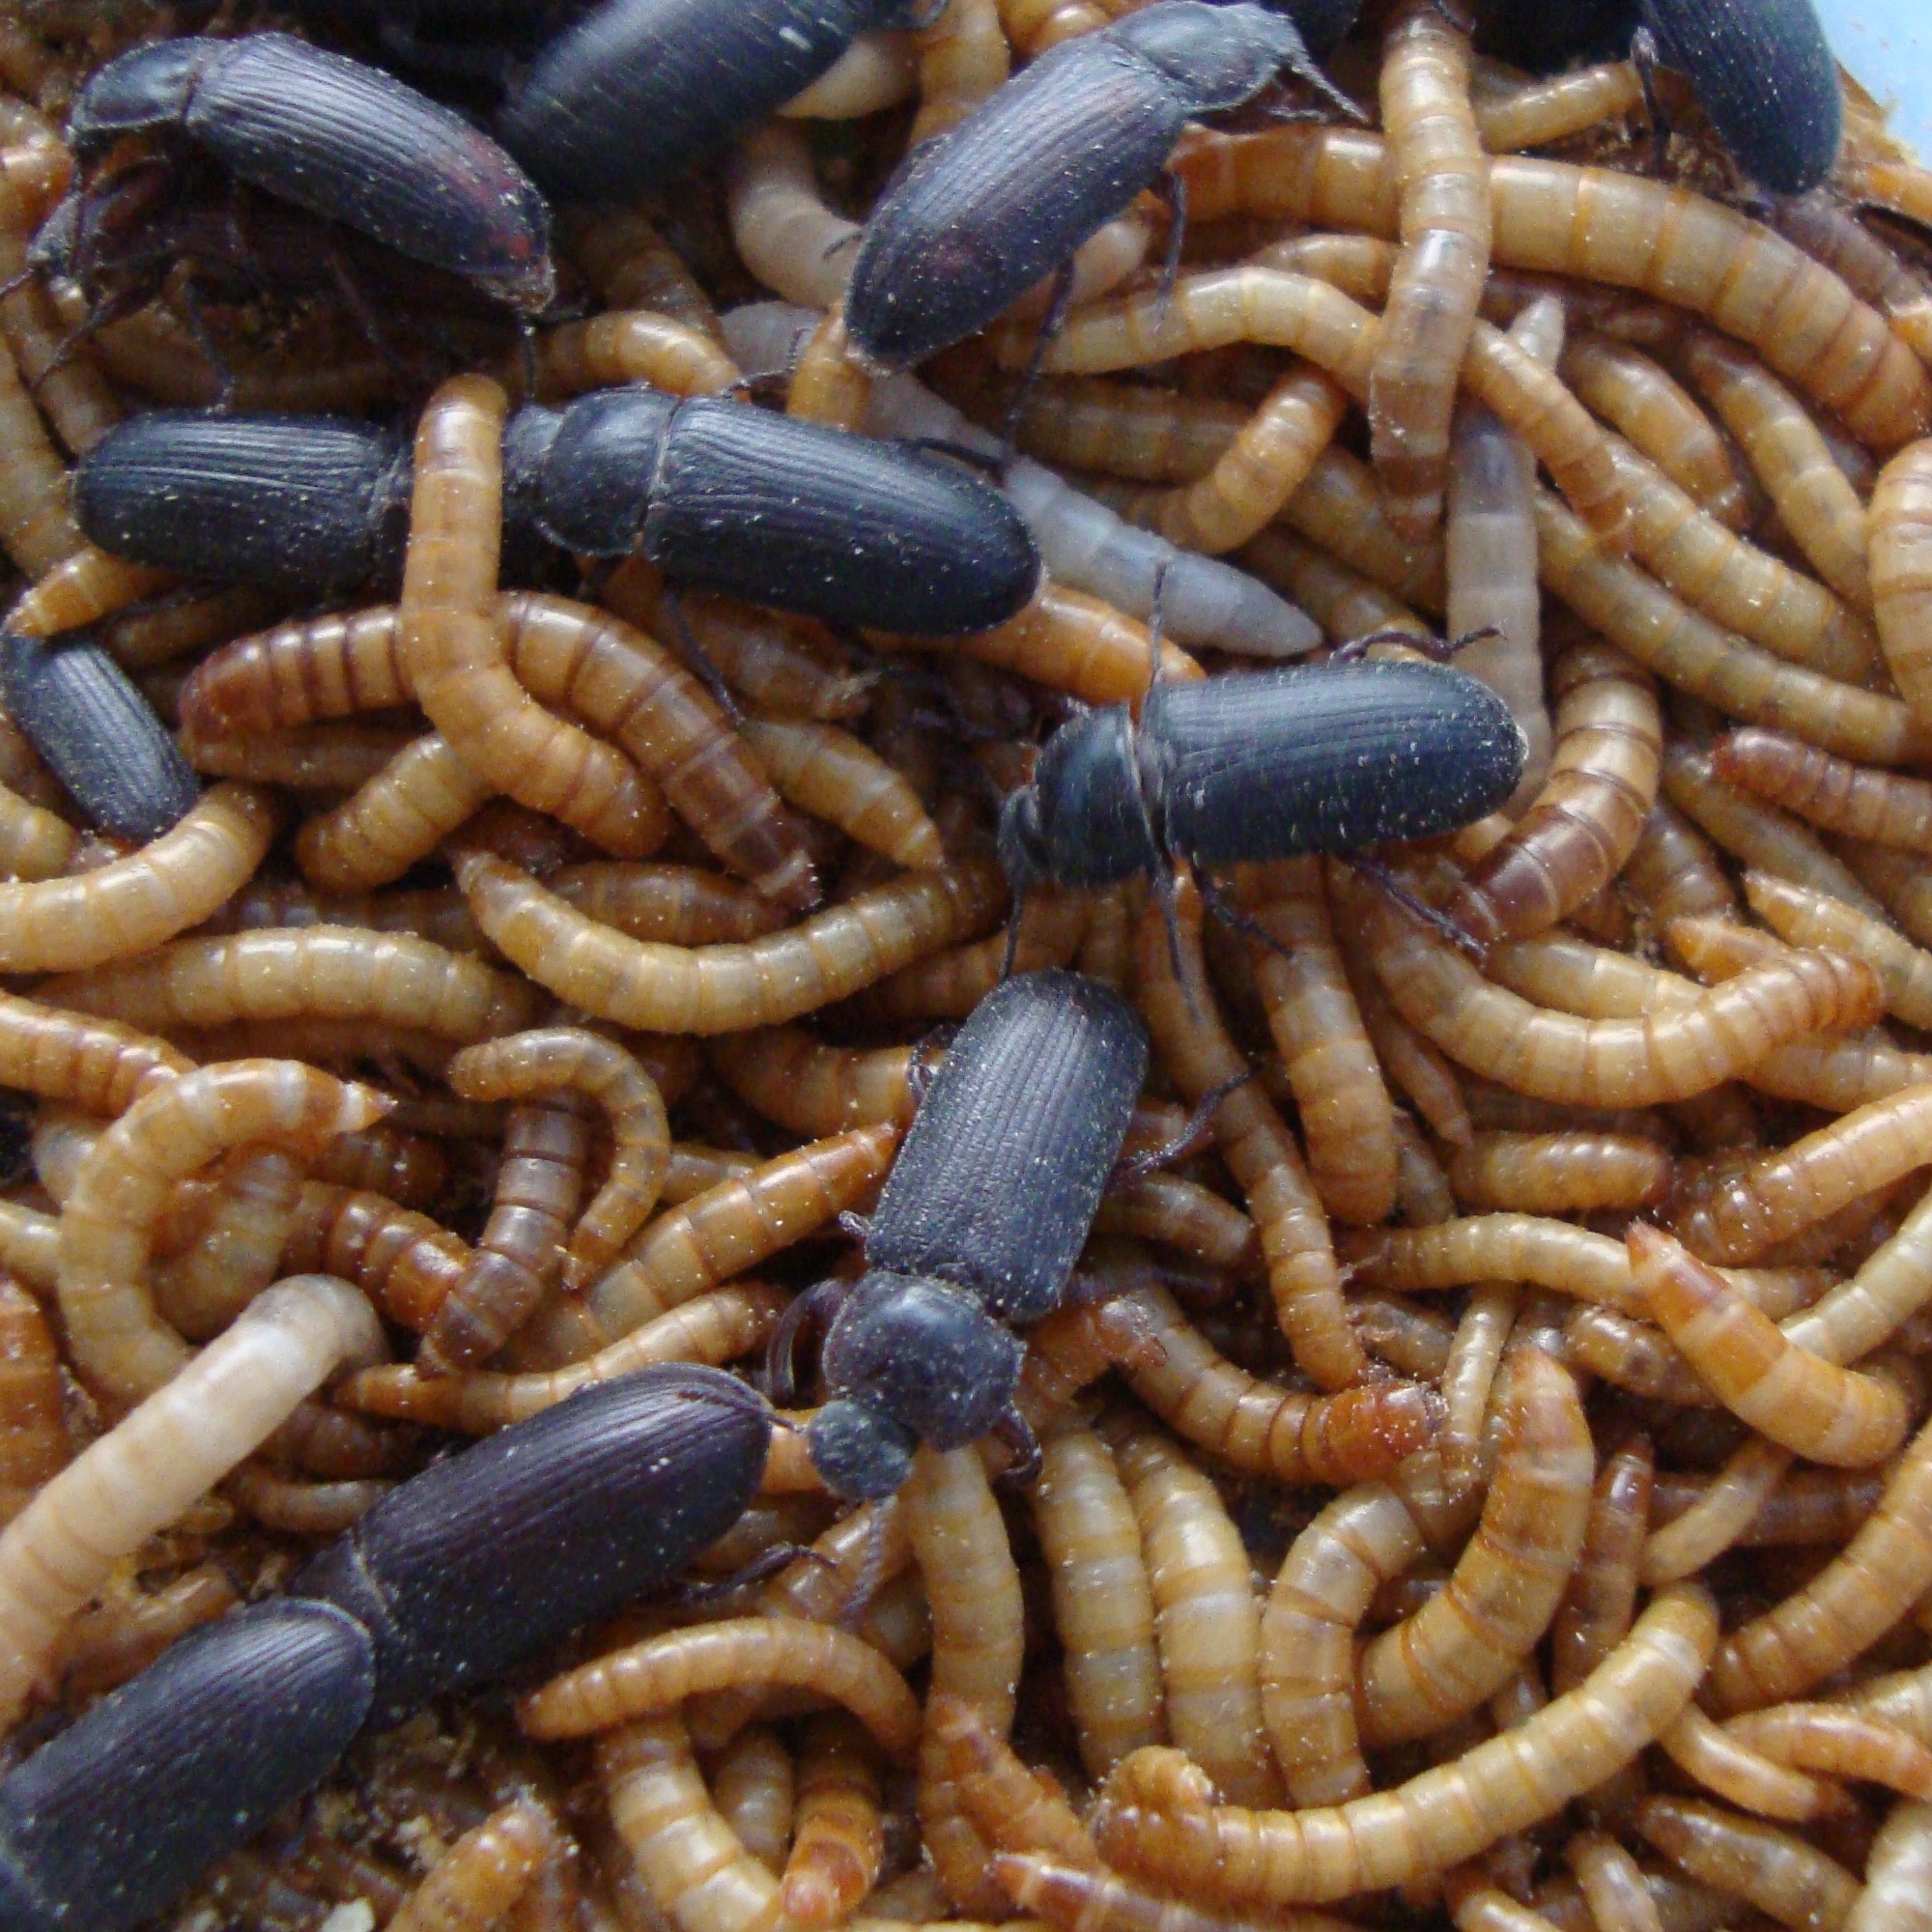 My mealworms